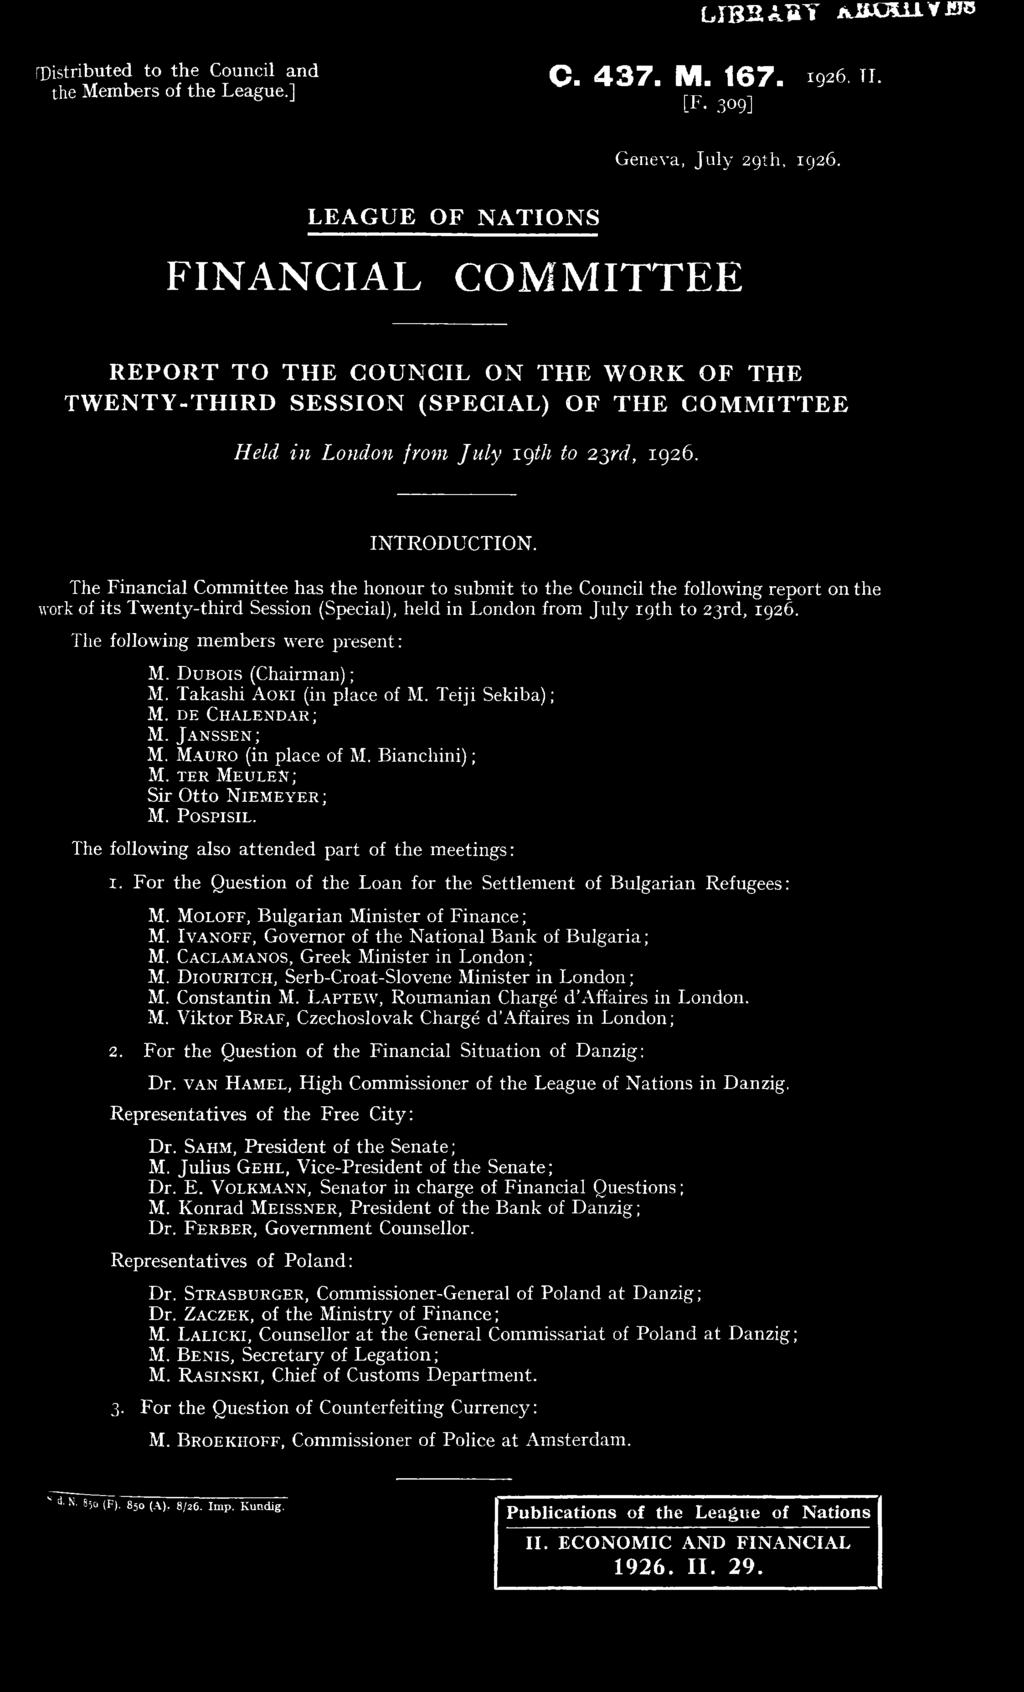 The Financial Committee has the honour to subm it to the Council the following report on the work of its Tw enty-third Session (Special), held in London from Ju ly 19th to 23rd, 1926.